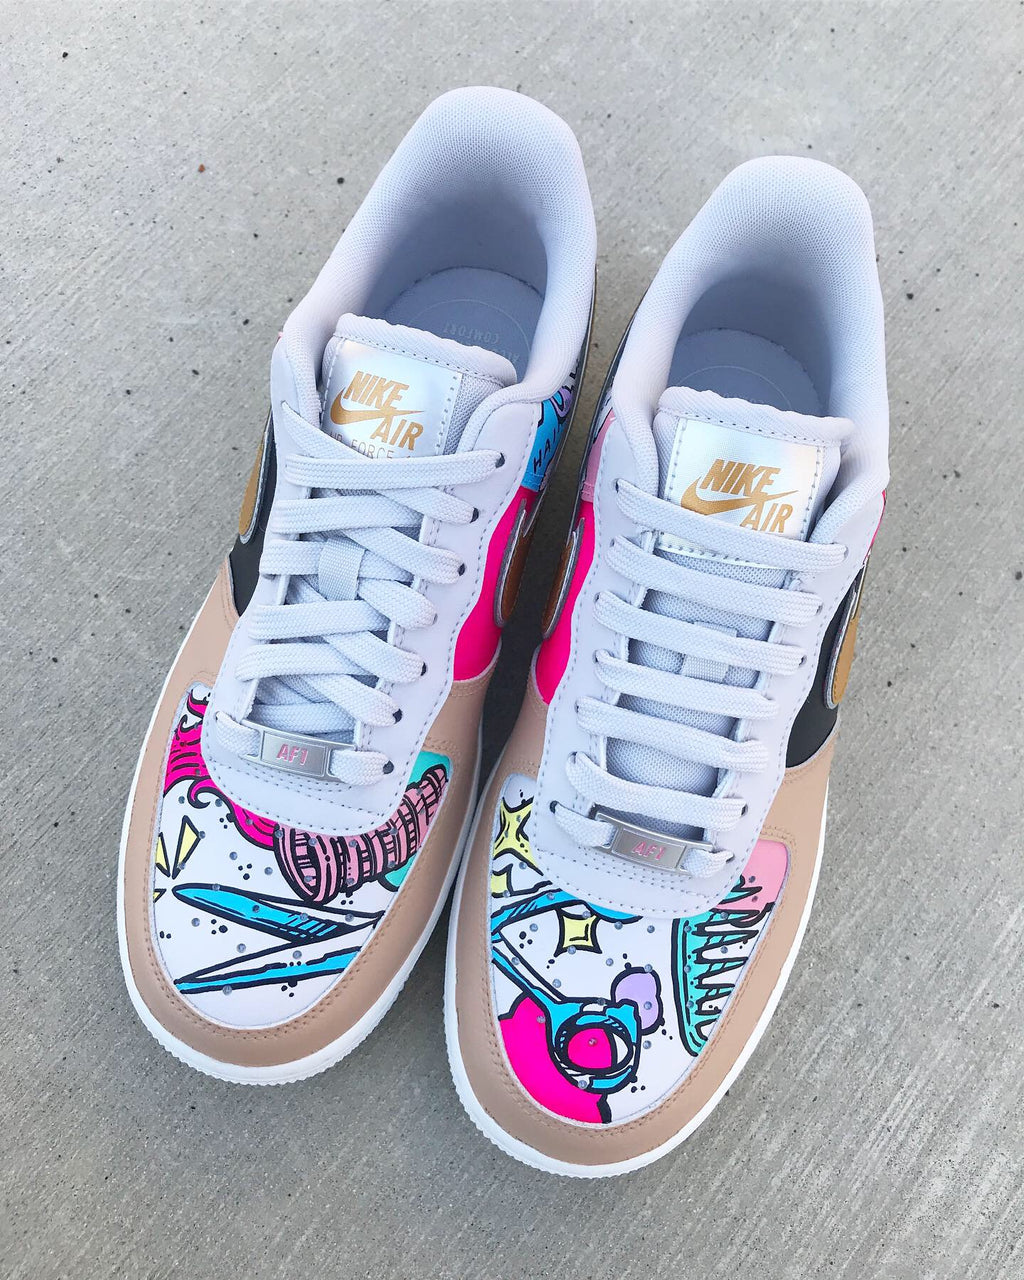 Dimes - Custom hand painted Nike Air Force 1 shoes – chadcantcolor